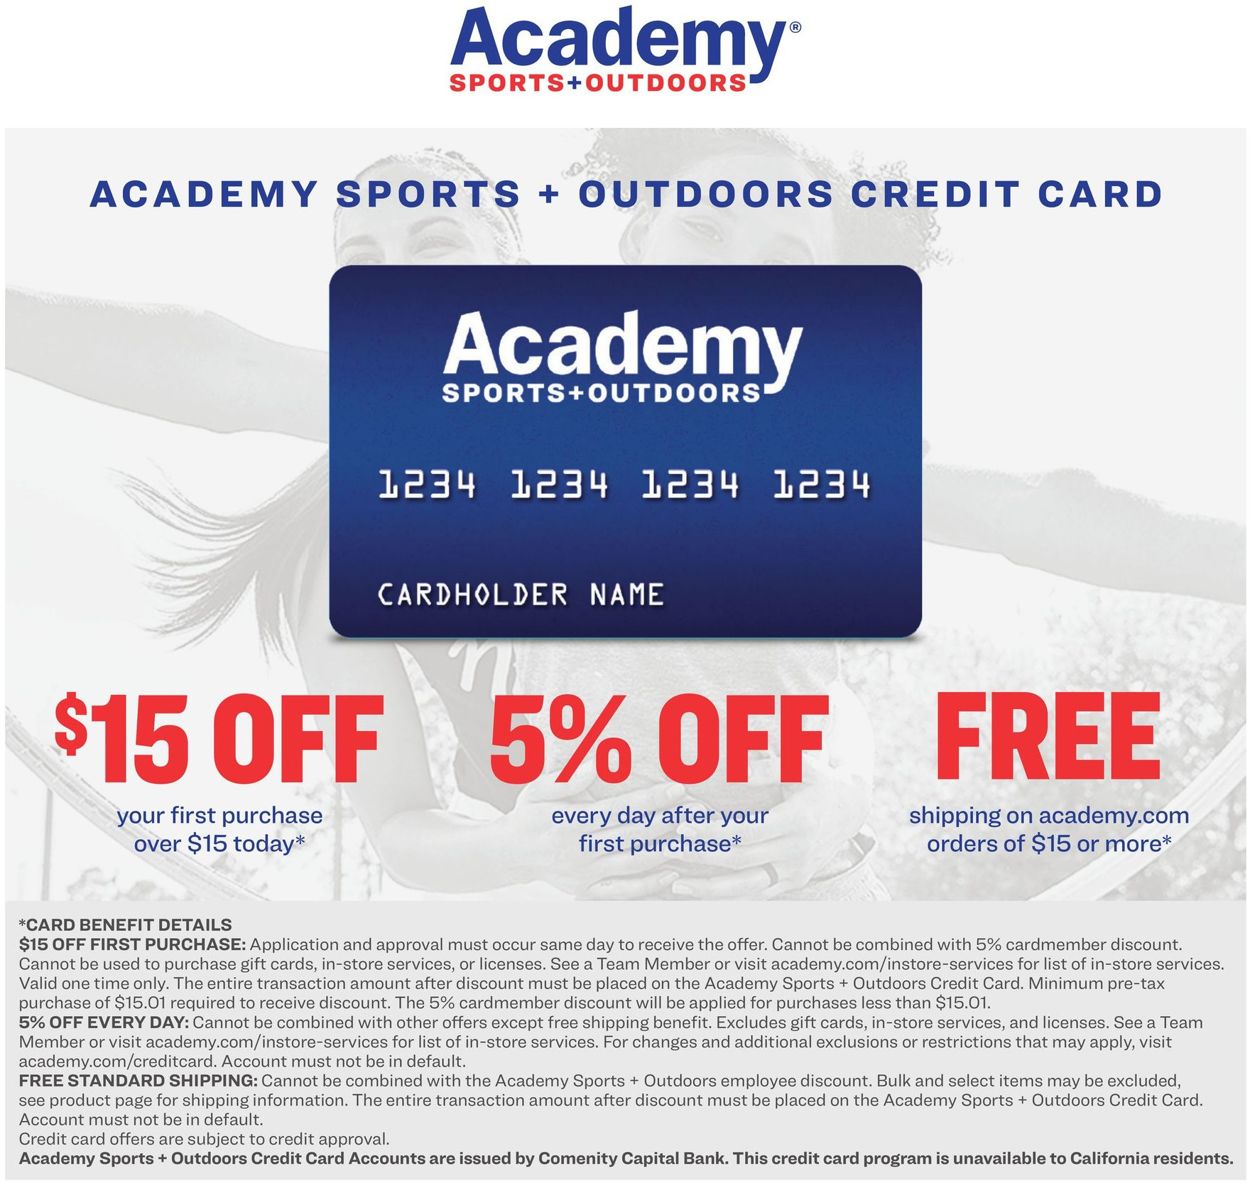 Academy Sports Ad from 03/22/2021